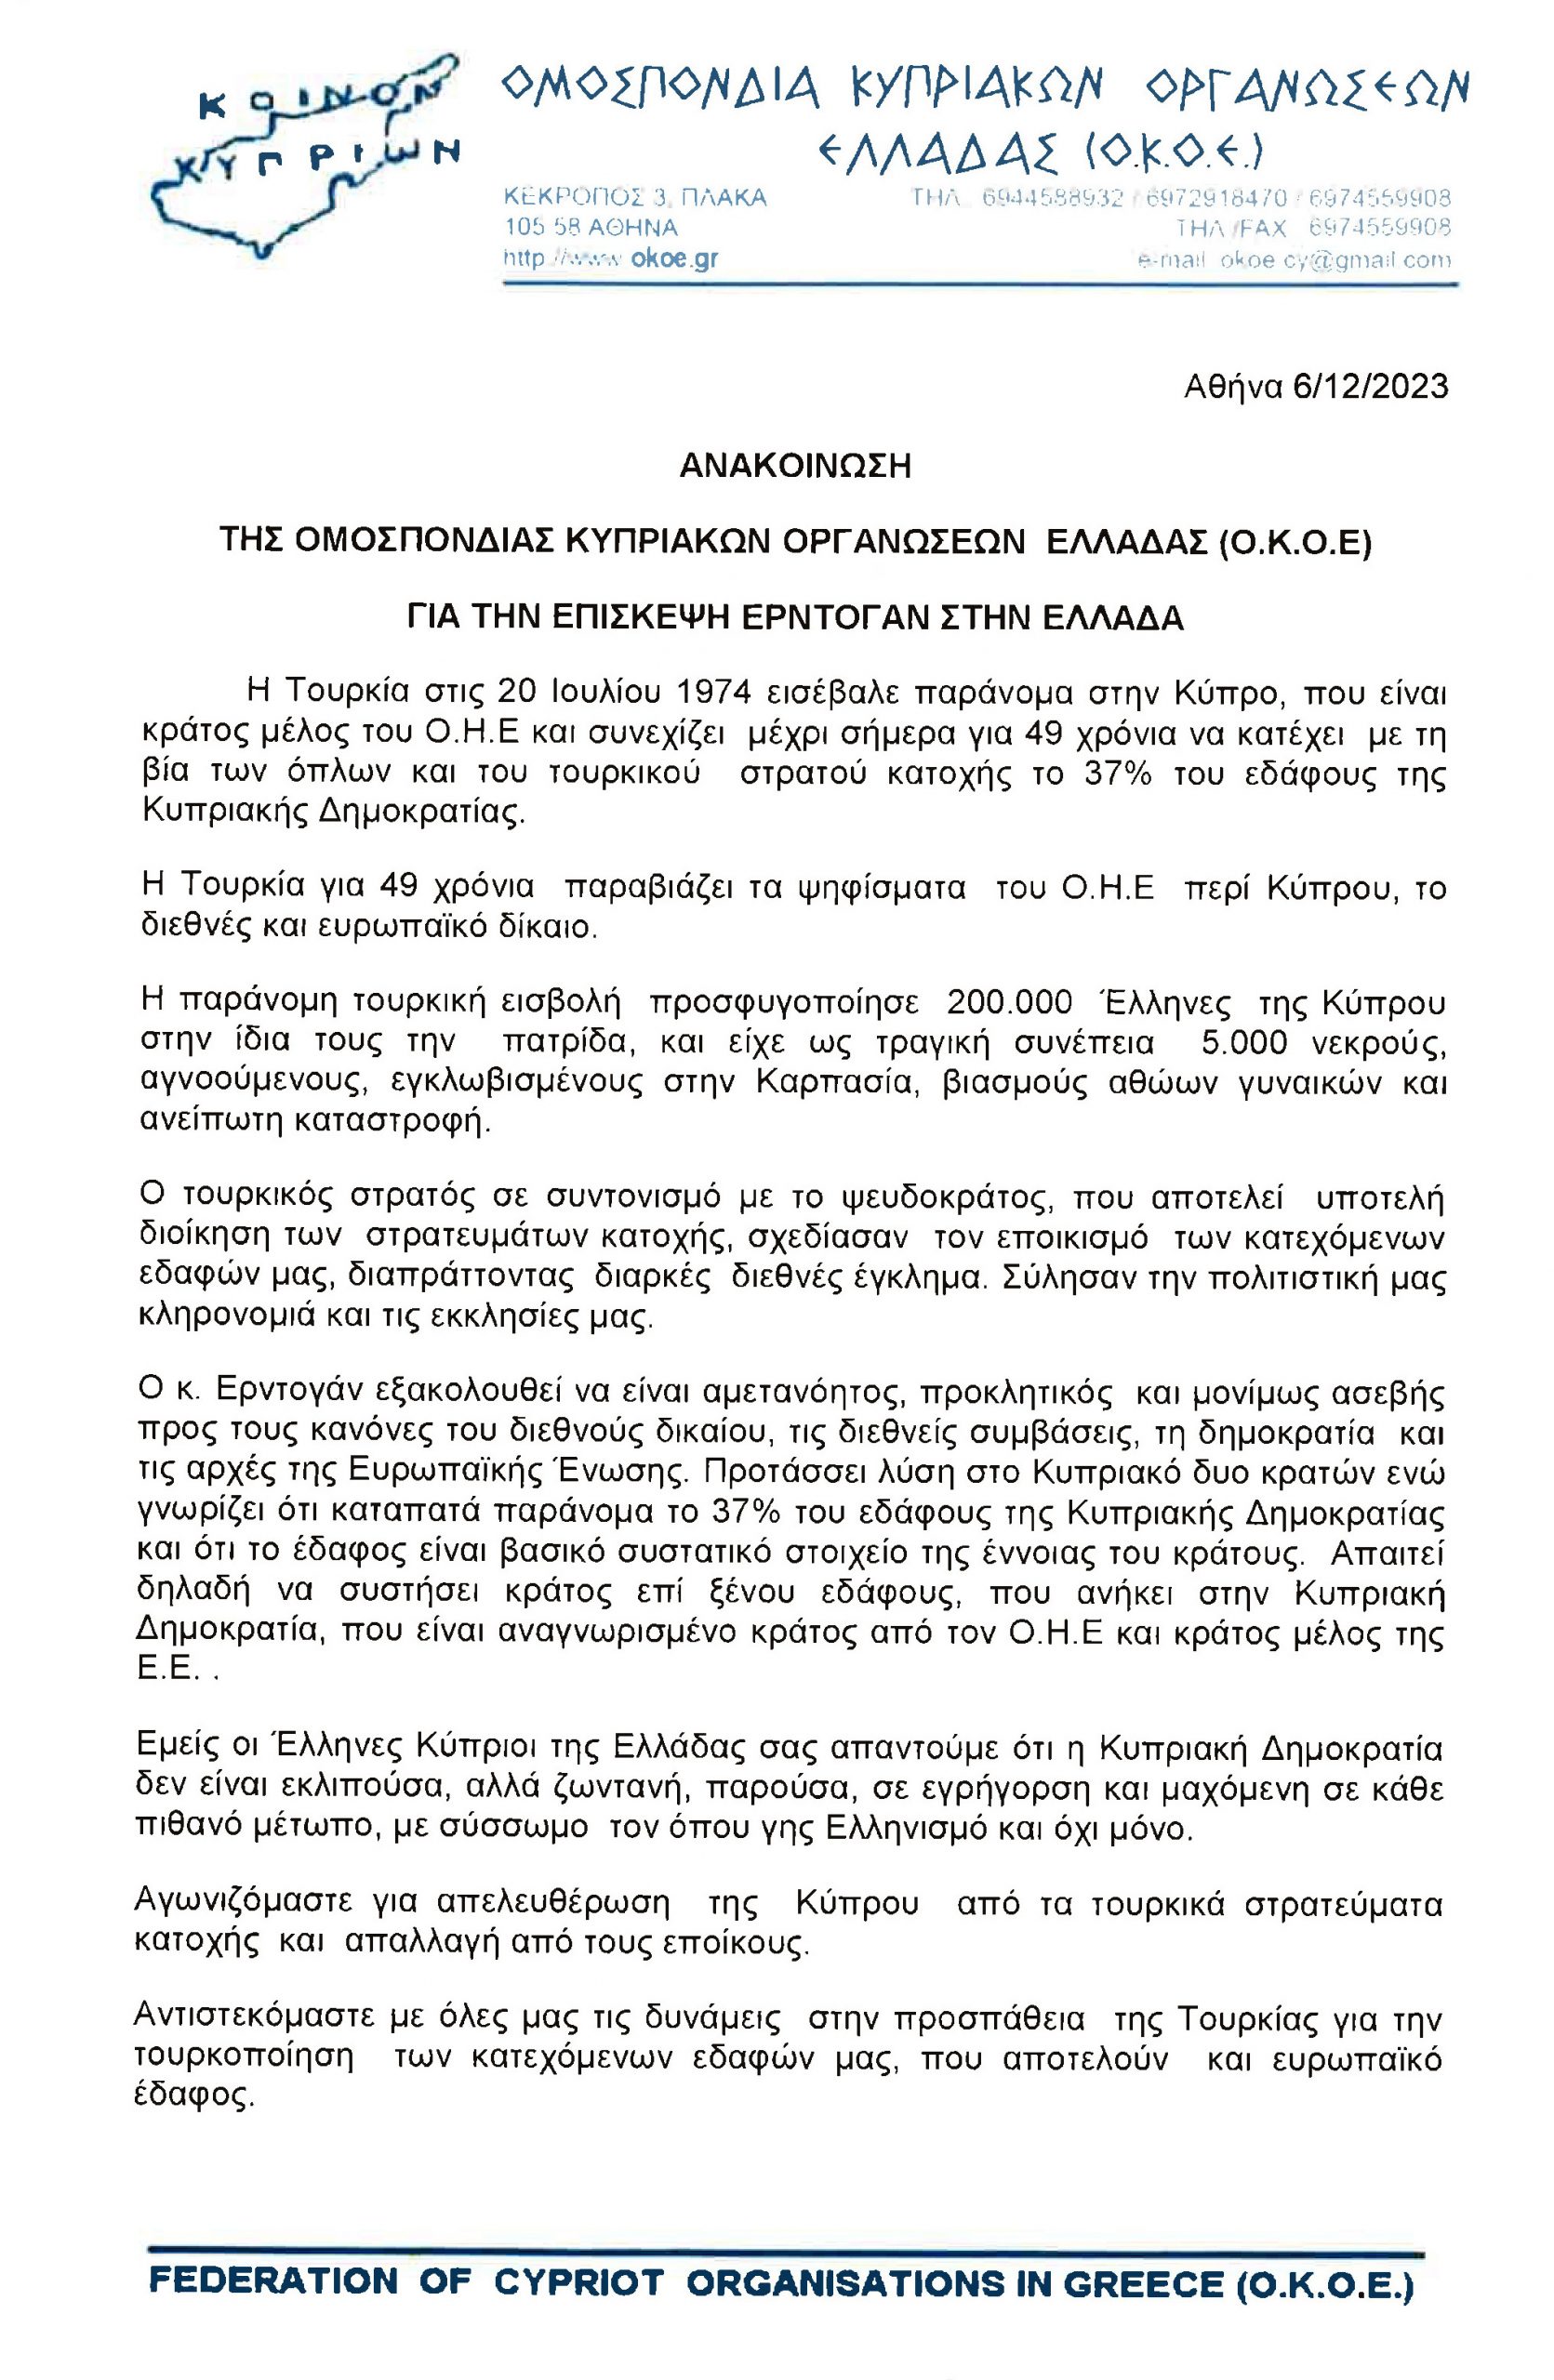 CYPRIOT-FEDERATION-OF--GREECE_Page_1-em